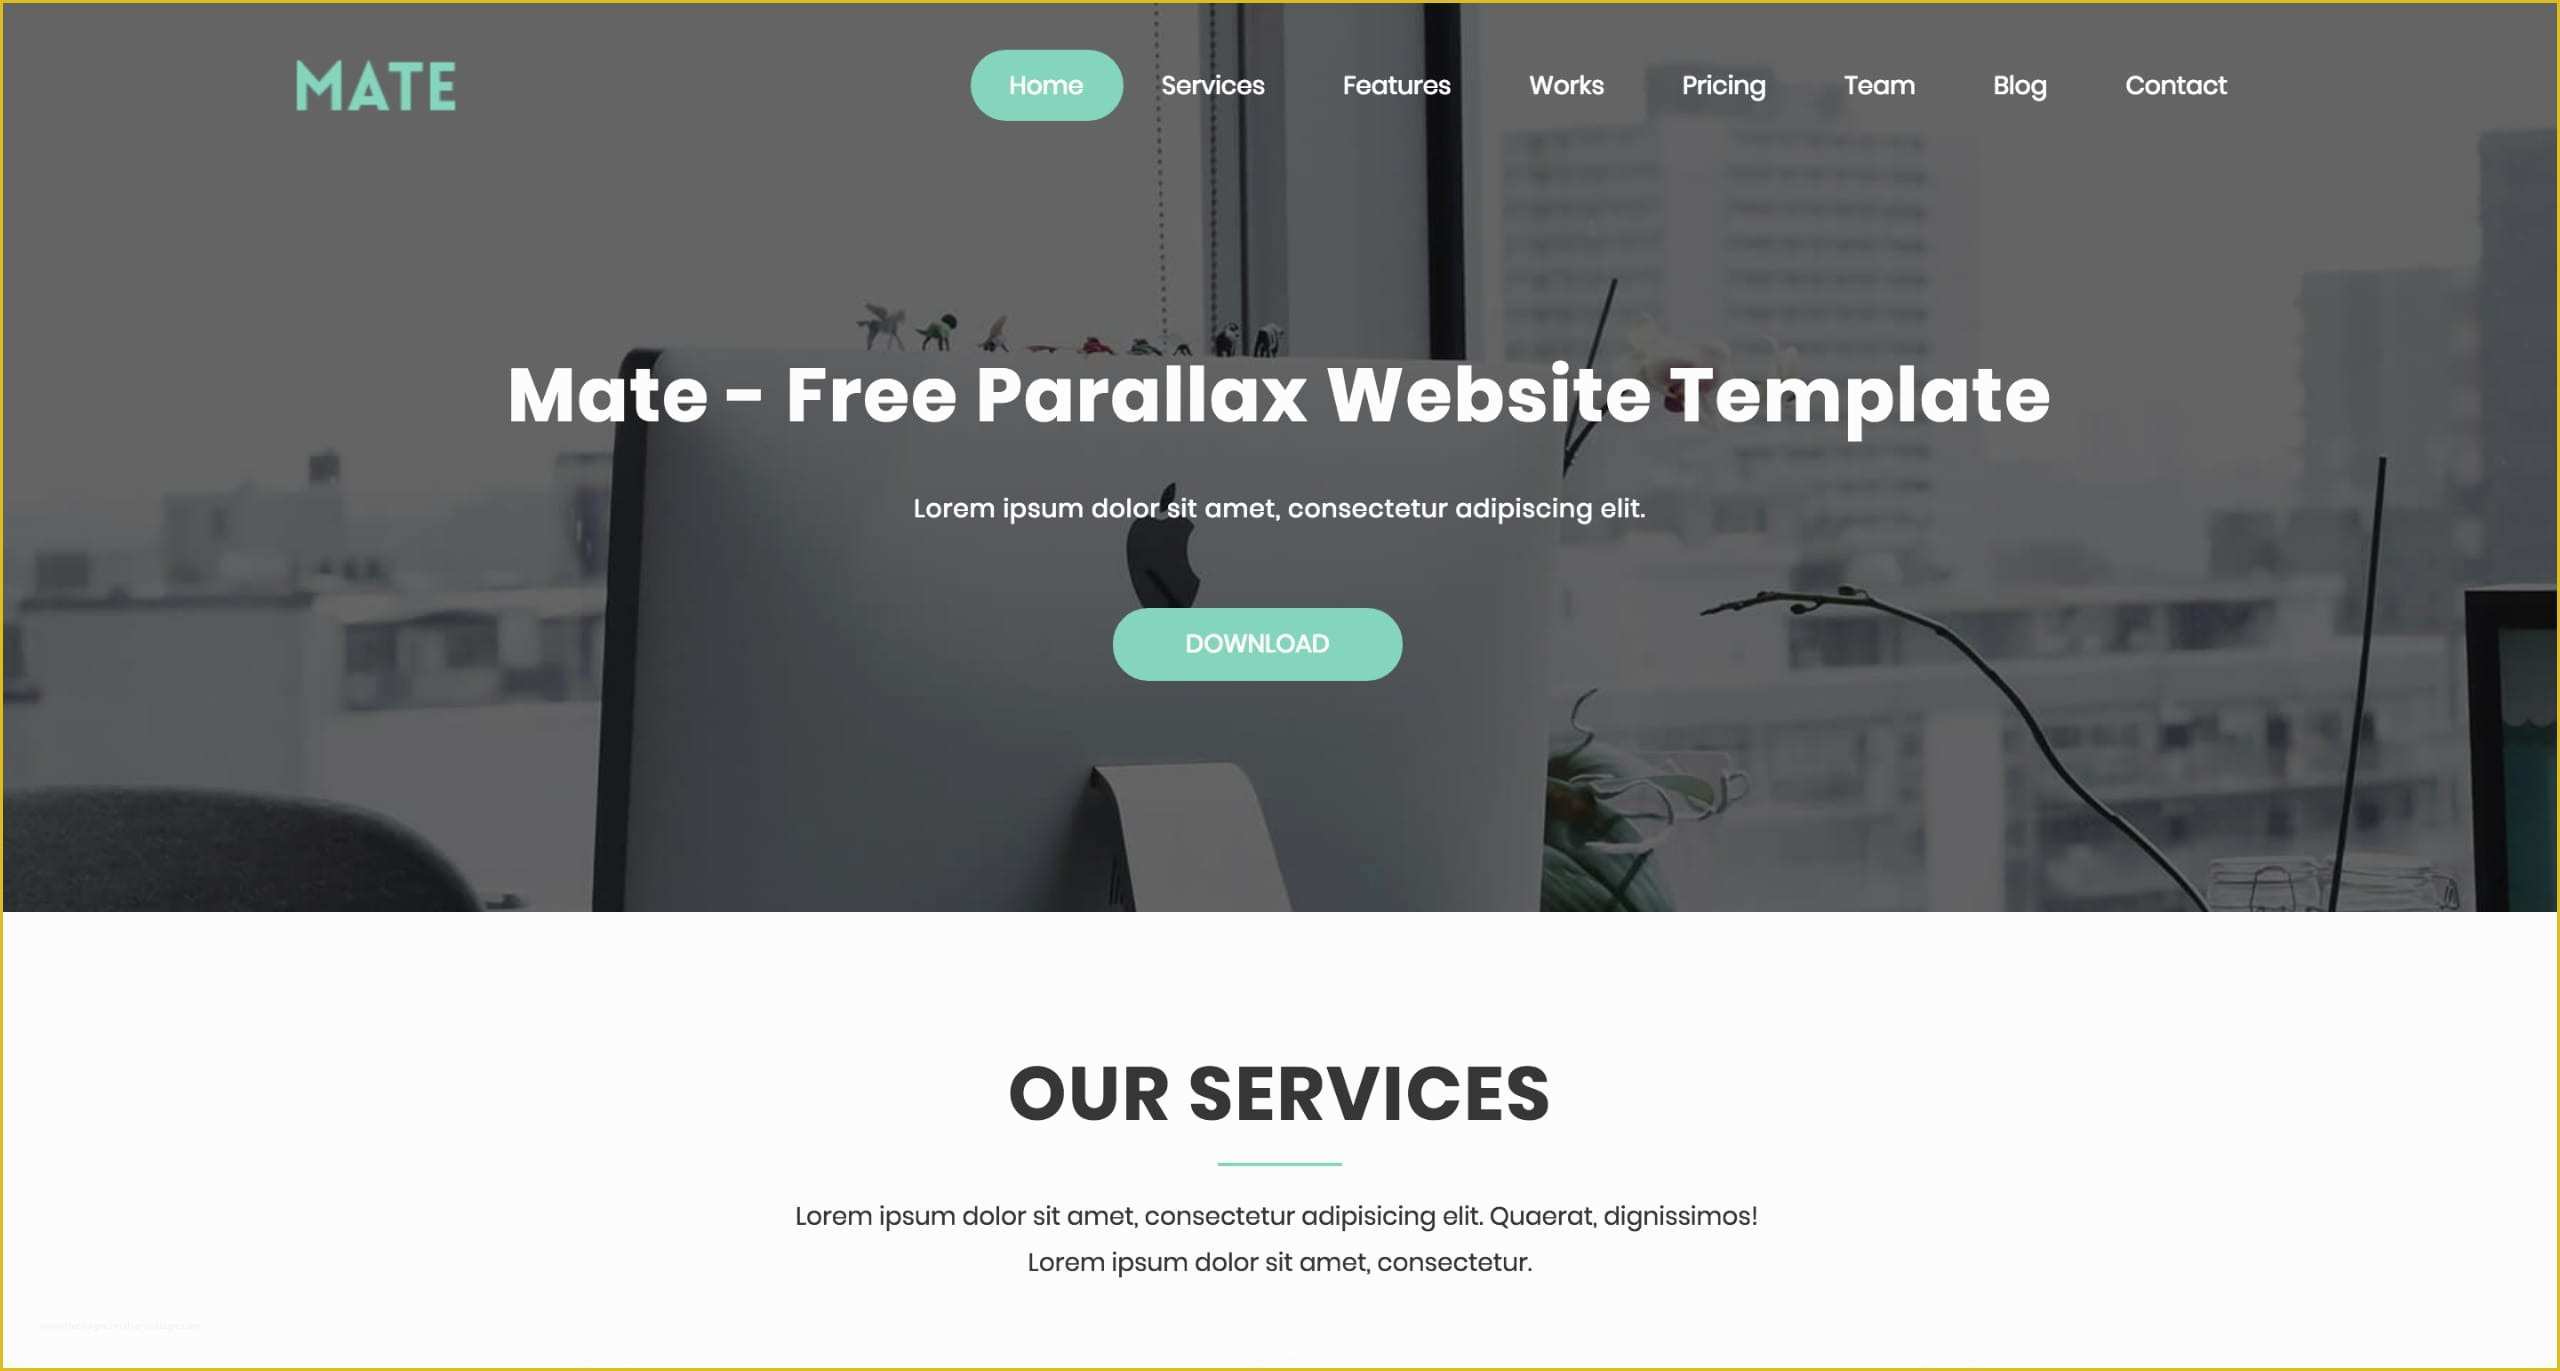 Free Service Website Templates Of Mate Free E Page Template Download and Review